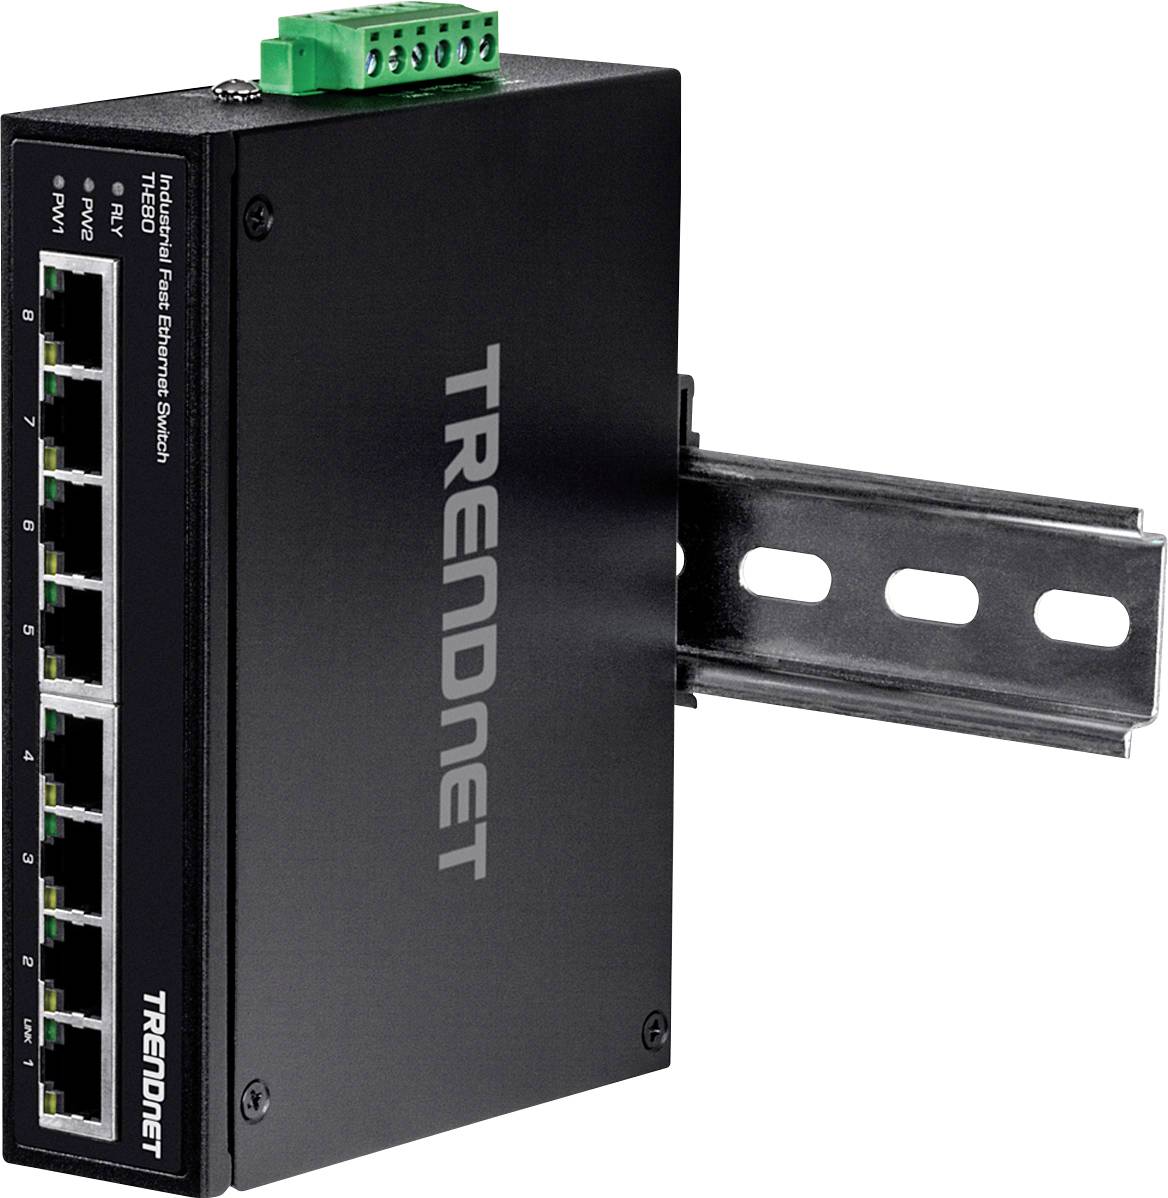 TRENDNET TI-E80 Industrial Ethernet Switch